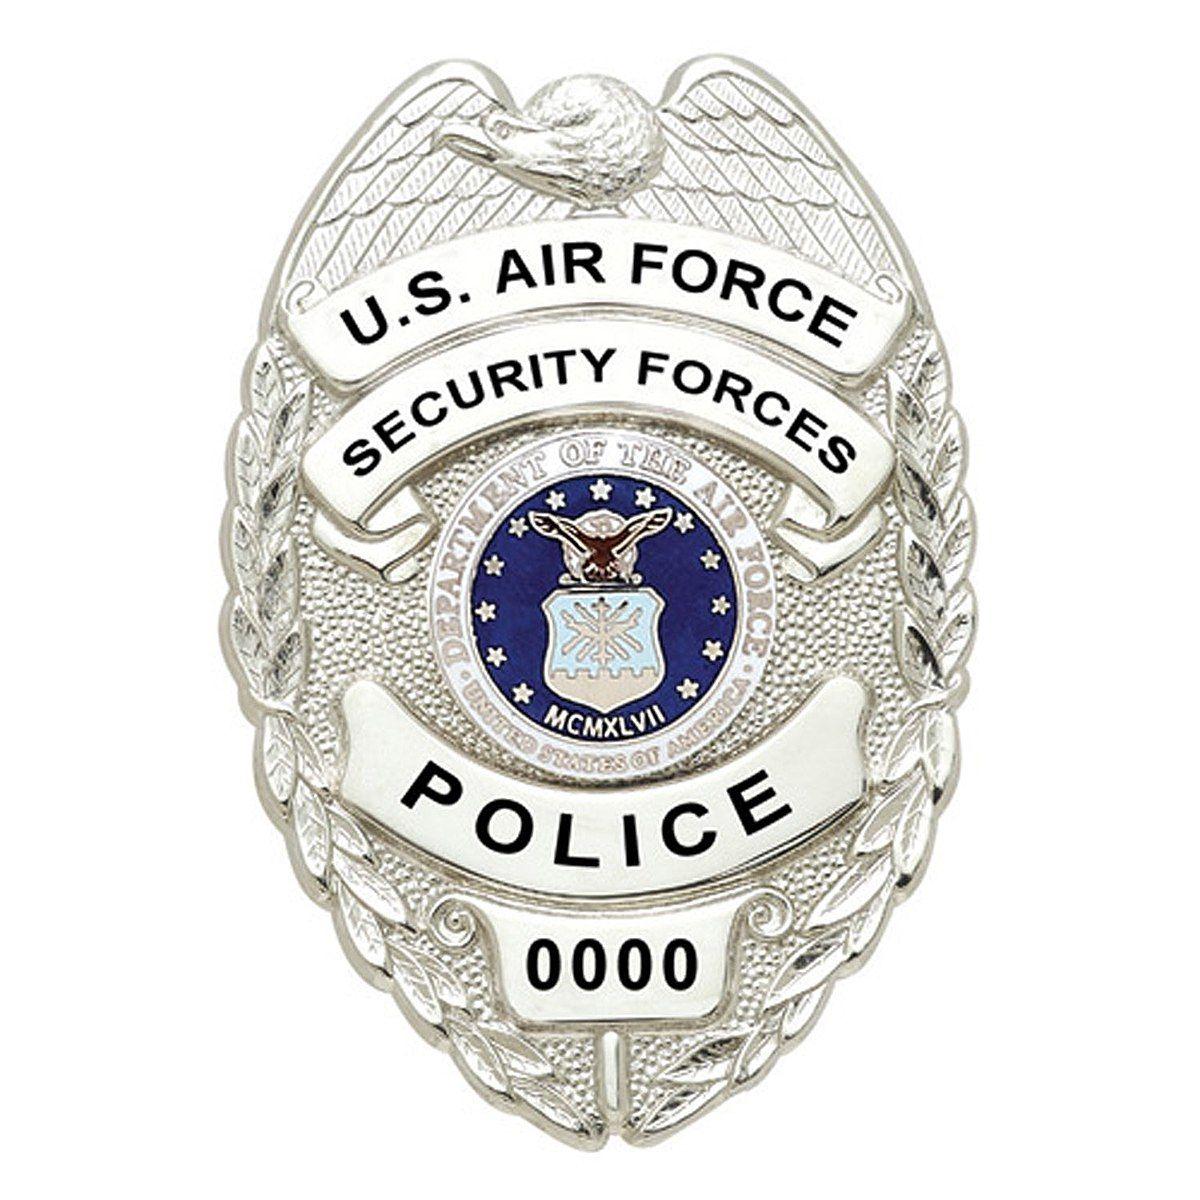 Dept of the Air Force Logo - Department of the Air Force Police